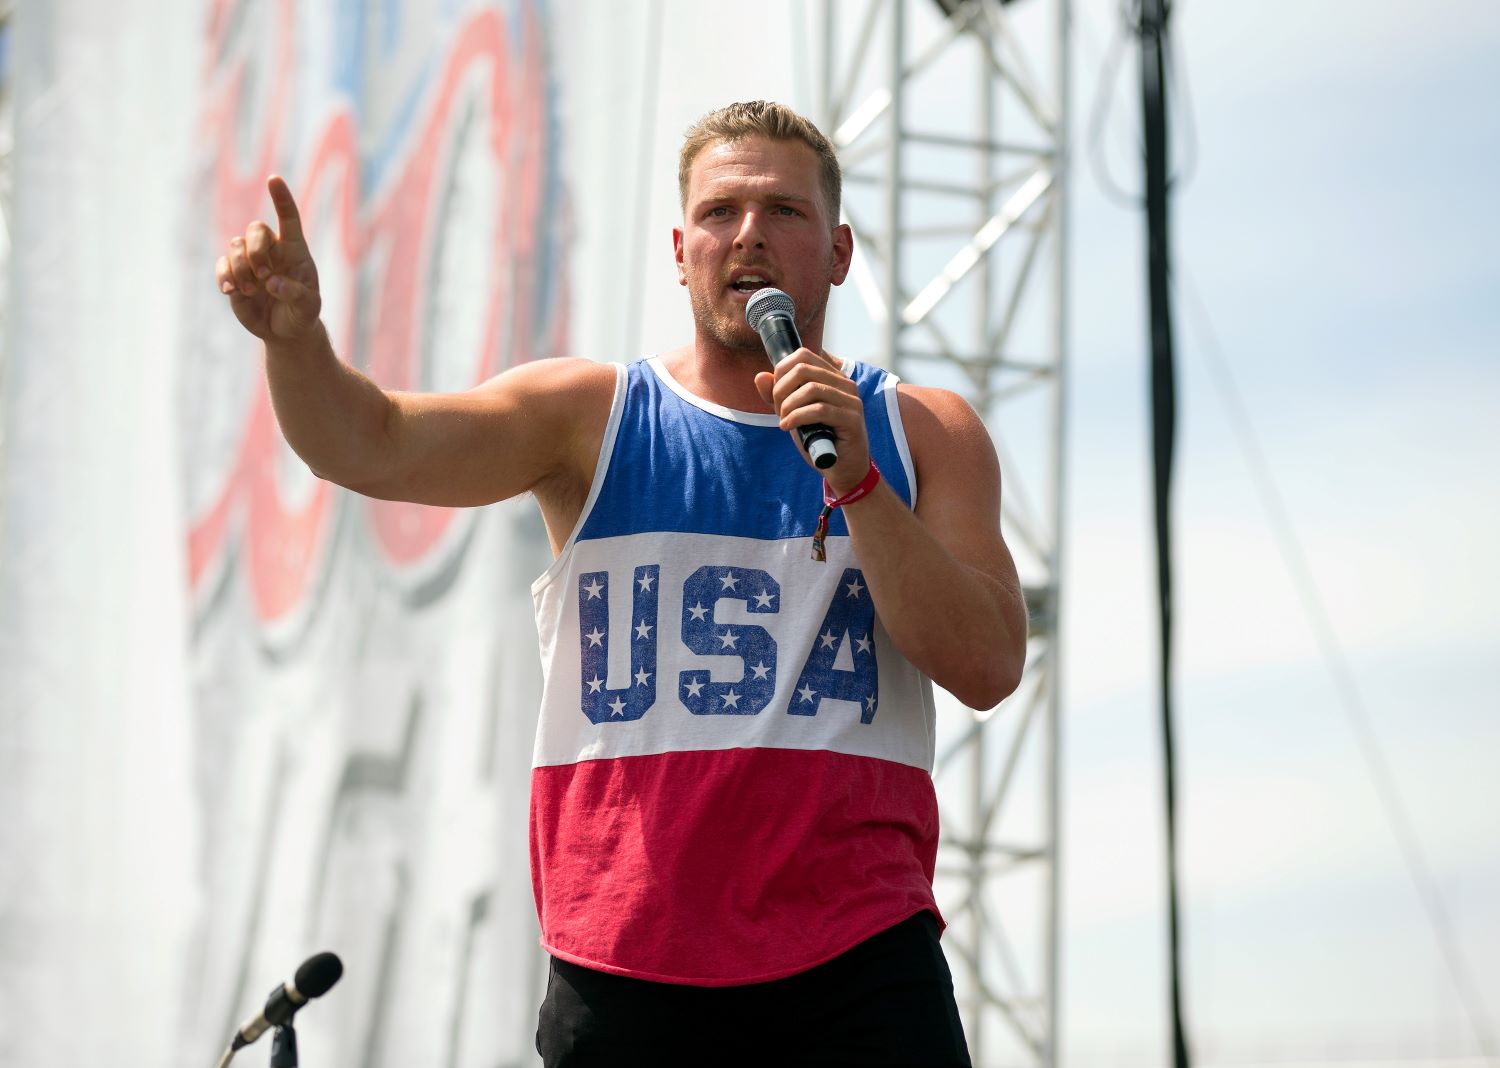 Outspoken former Colts punter Pat McAfee put some of his own fans on blast during his fiery discussion about the riots at the U.S. Capitol.